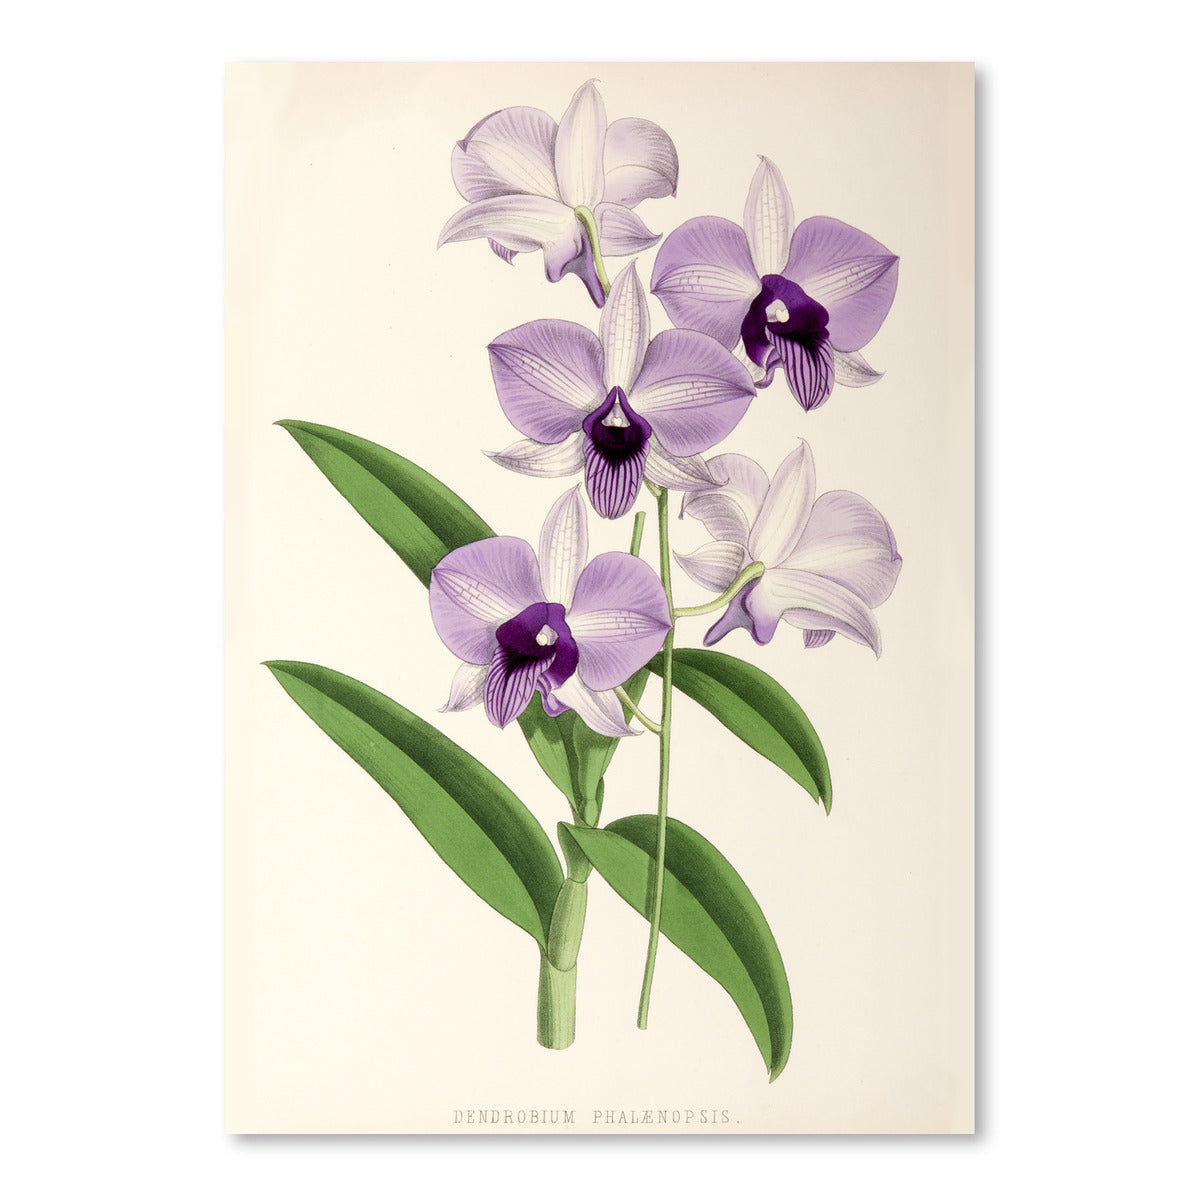 Fitch Orchid Dendrobium Phlaenopsis by New York Botanical Garden Art Print - Art Print - Americanflat